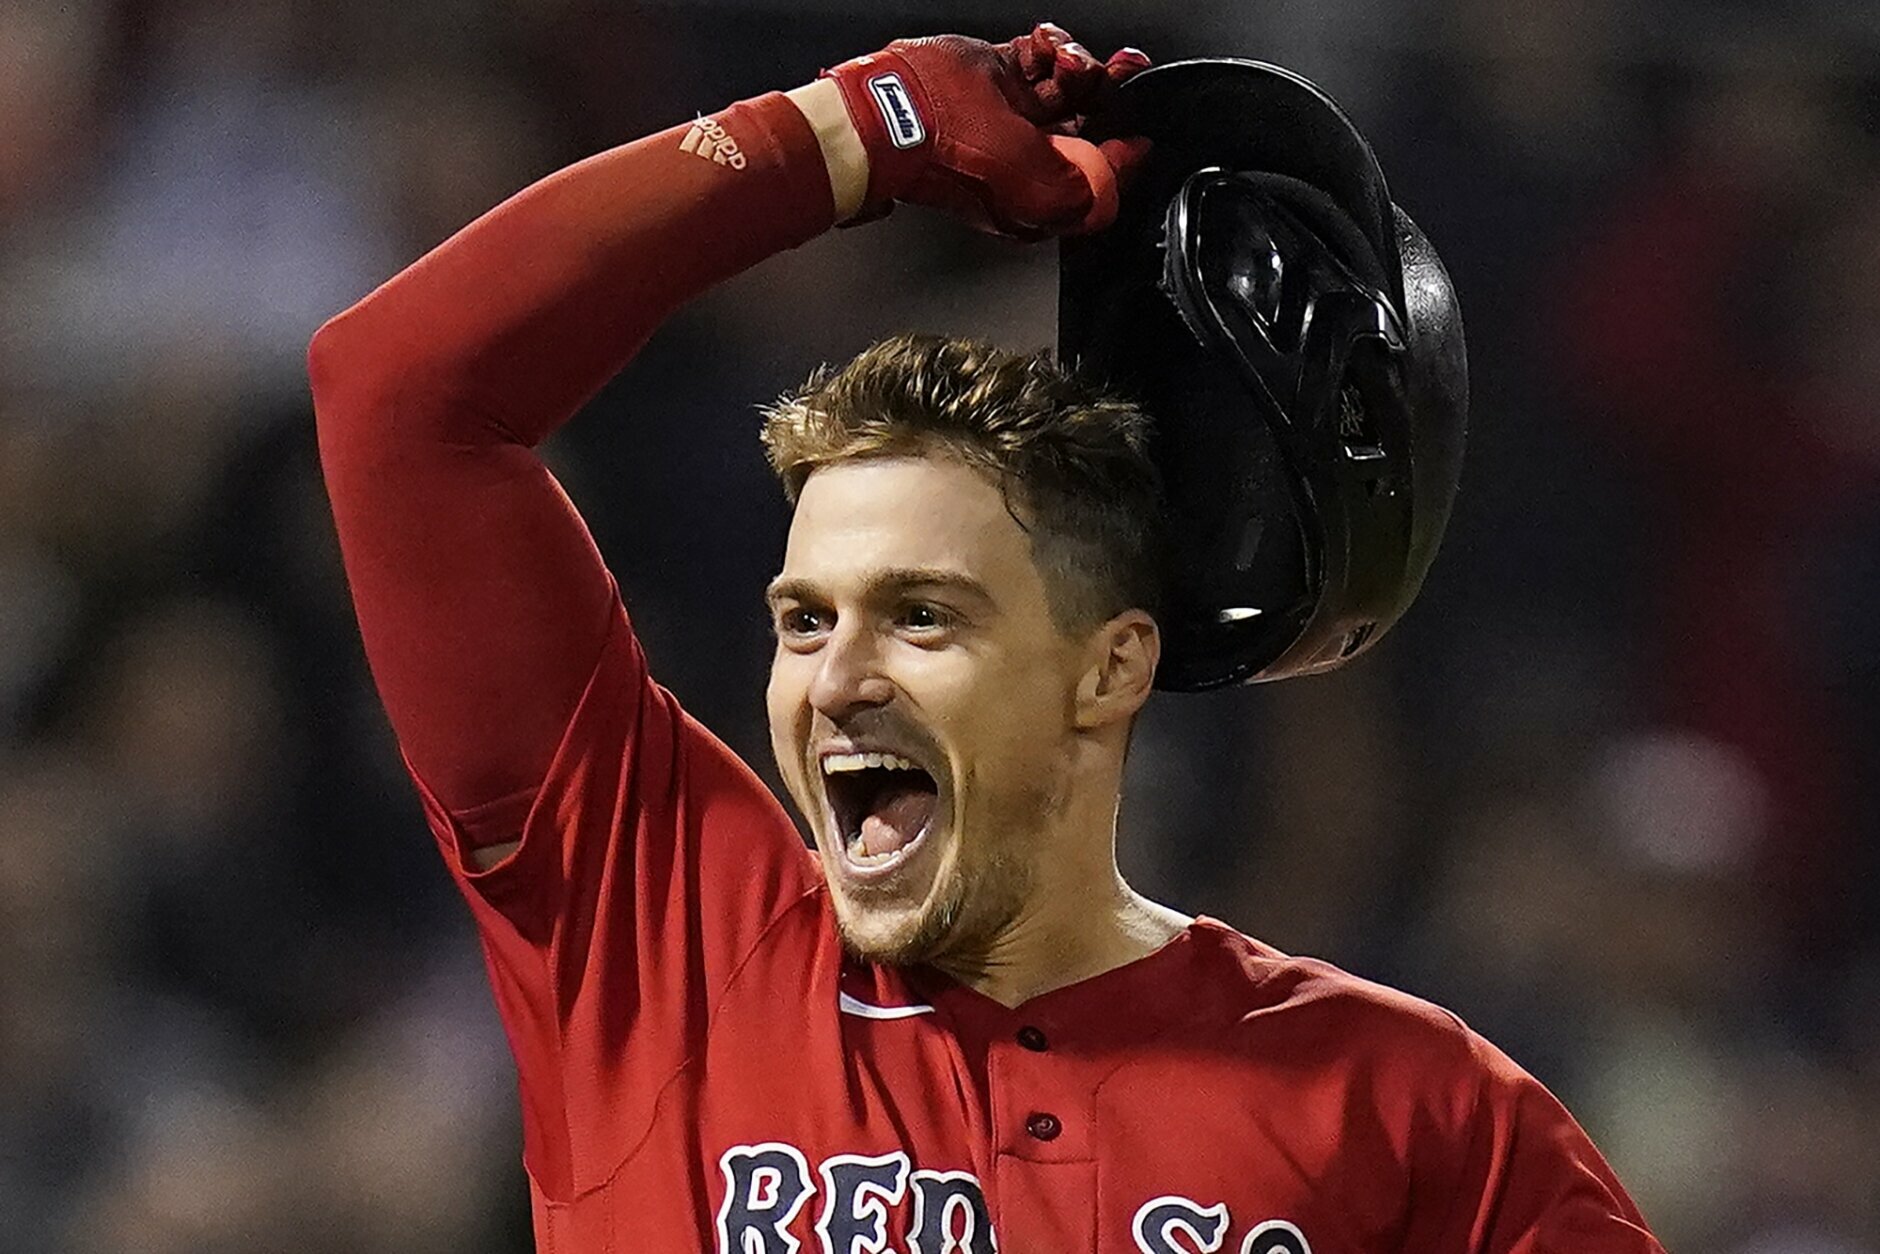 Walk it off: Red Sox eliminate Rays 6-5 with late sac fly - WTOP News